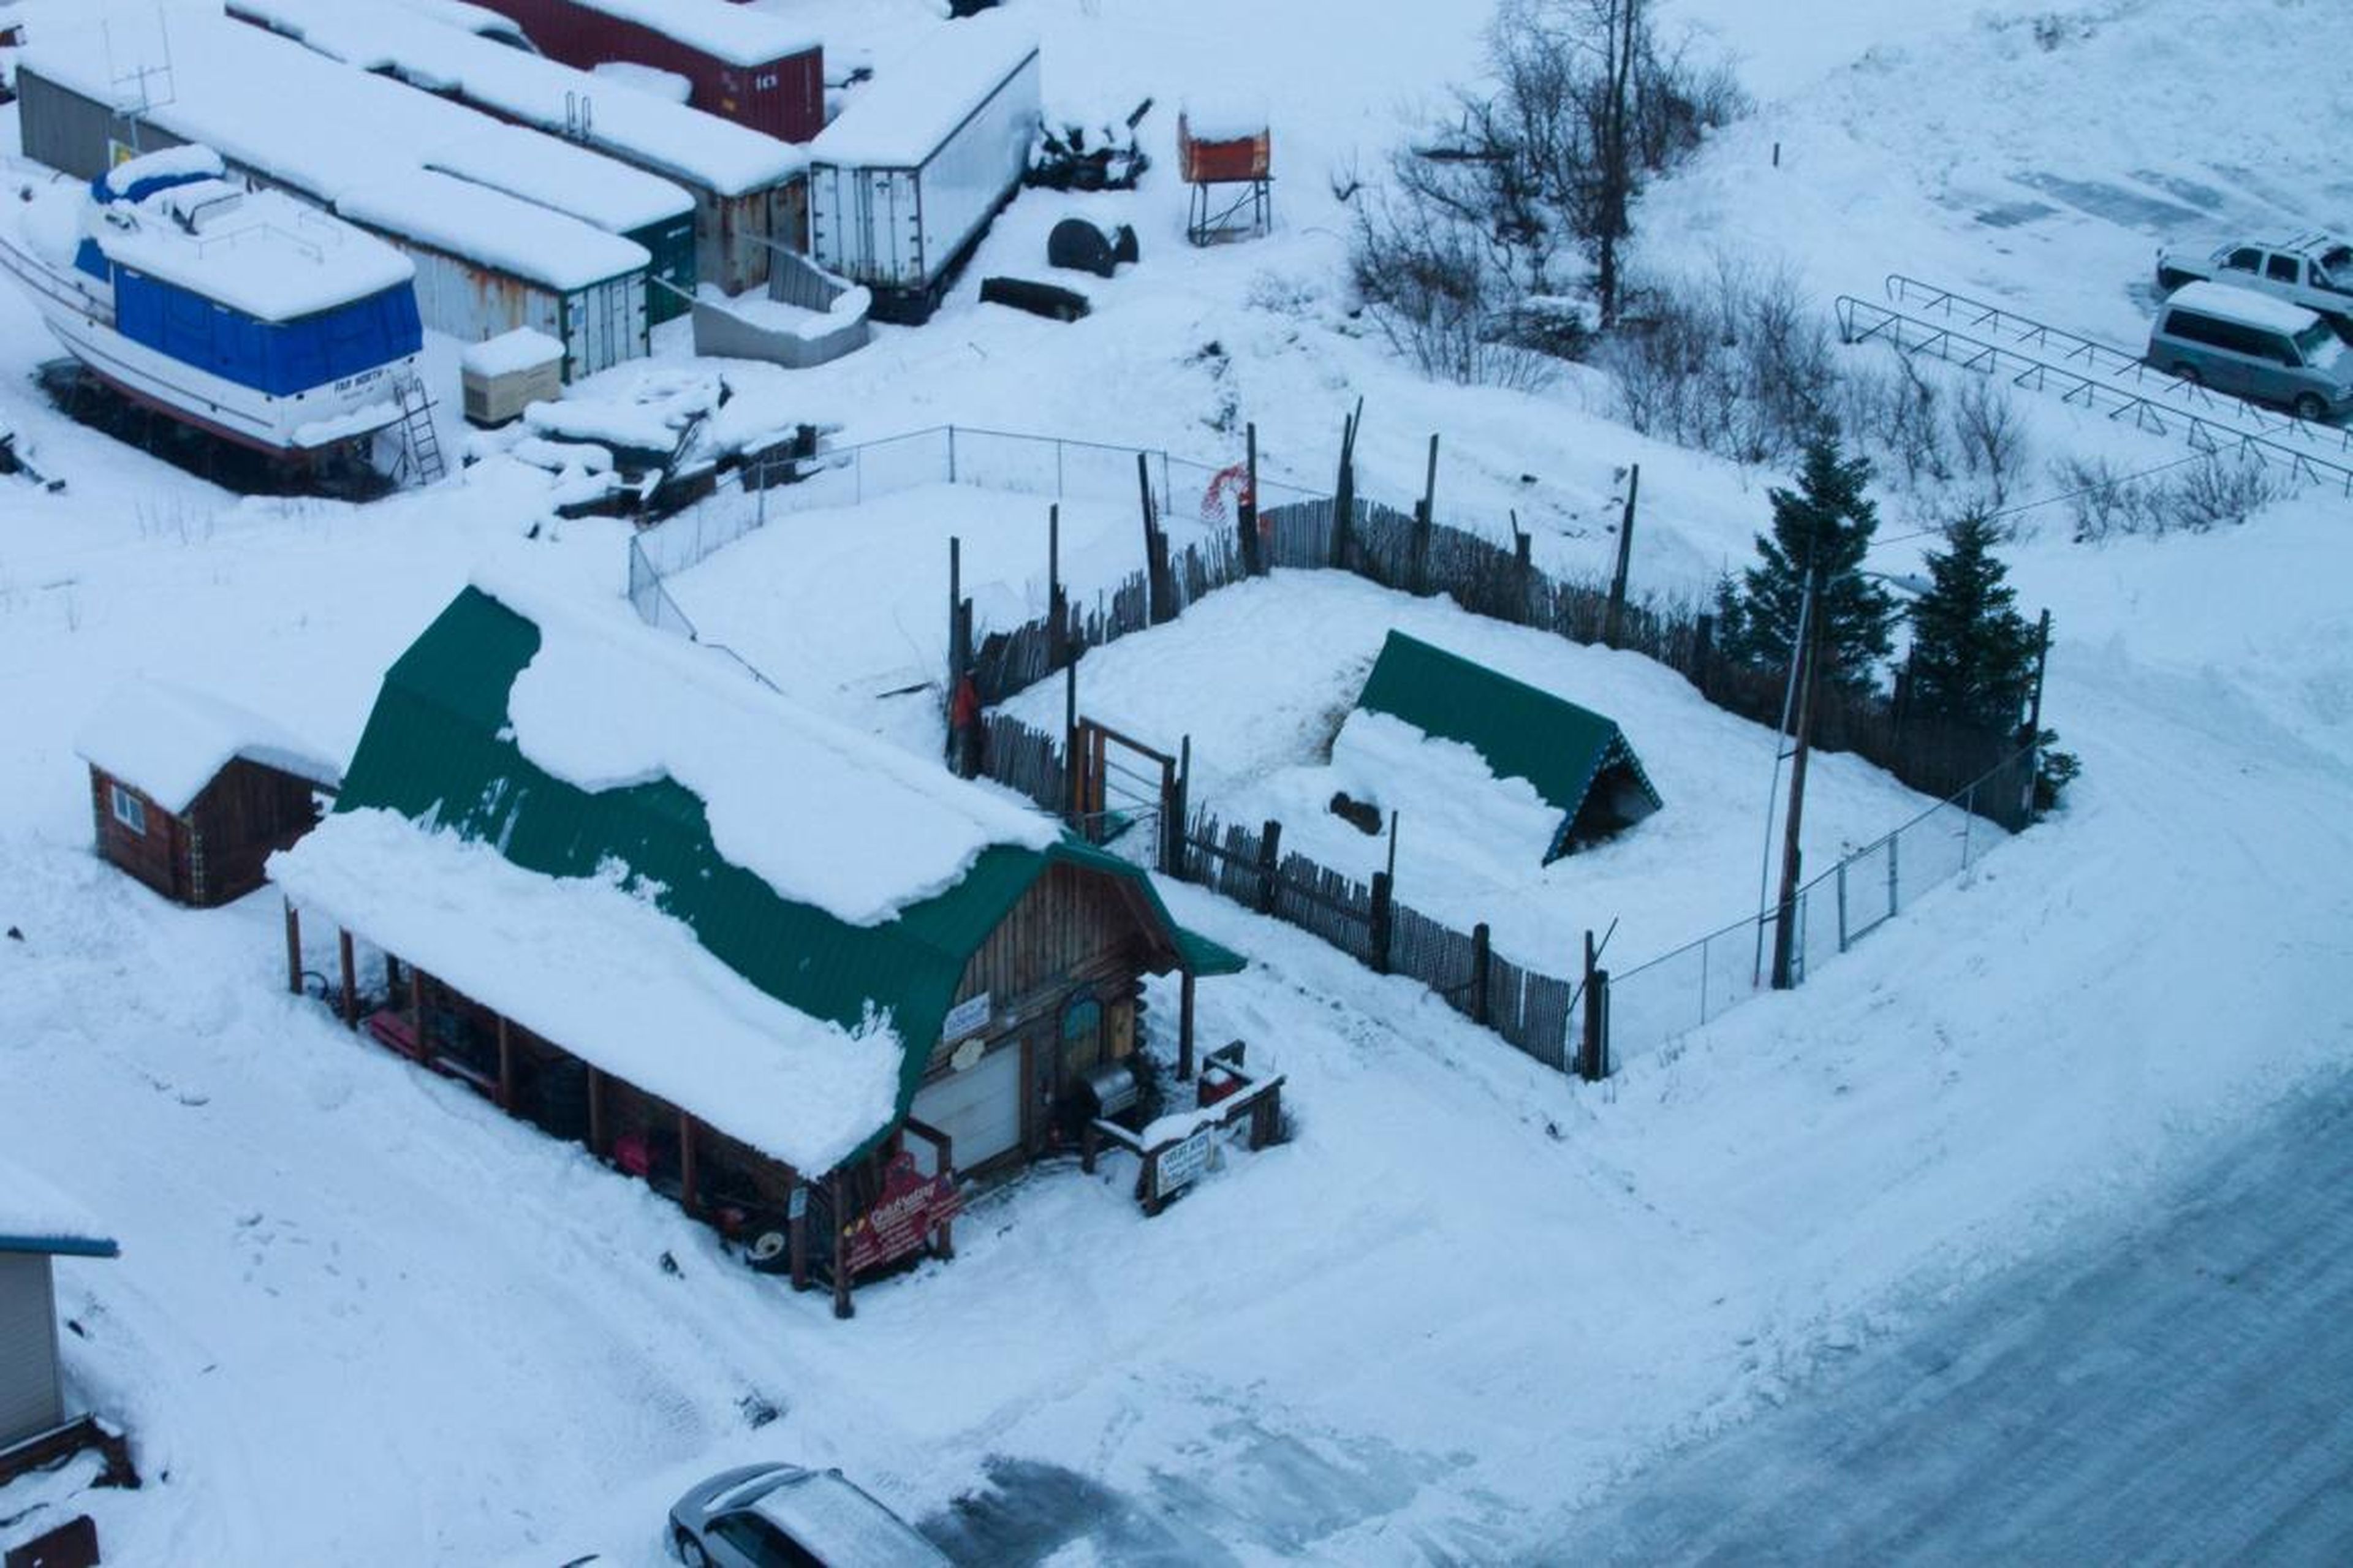 "The reindeer pen as seen from above."